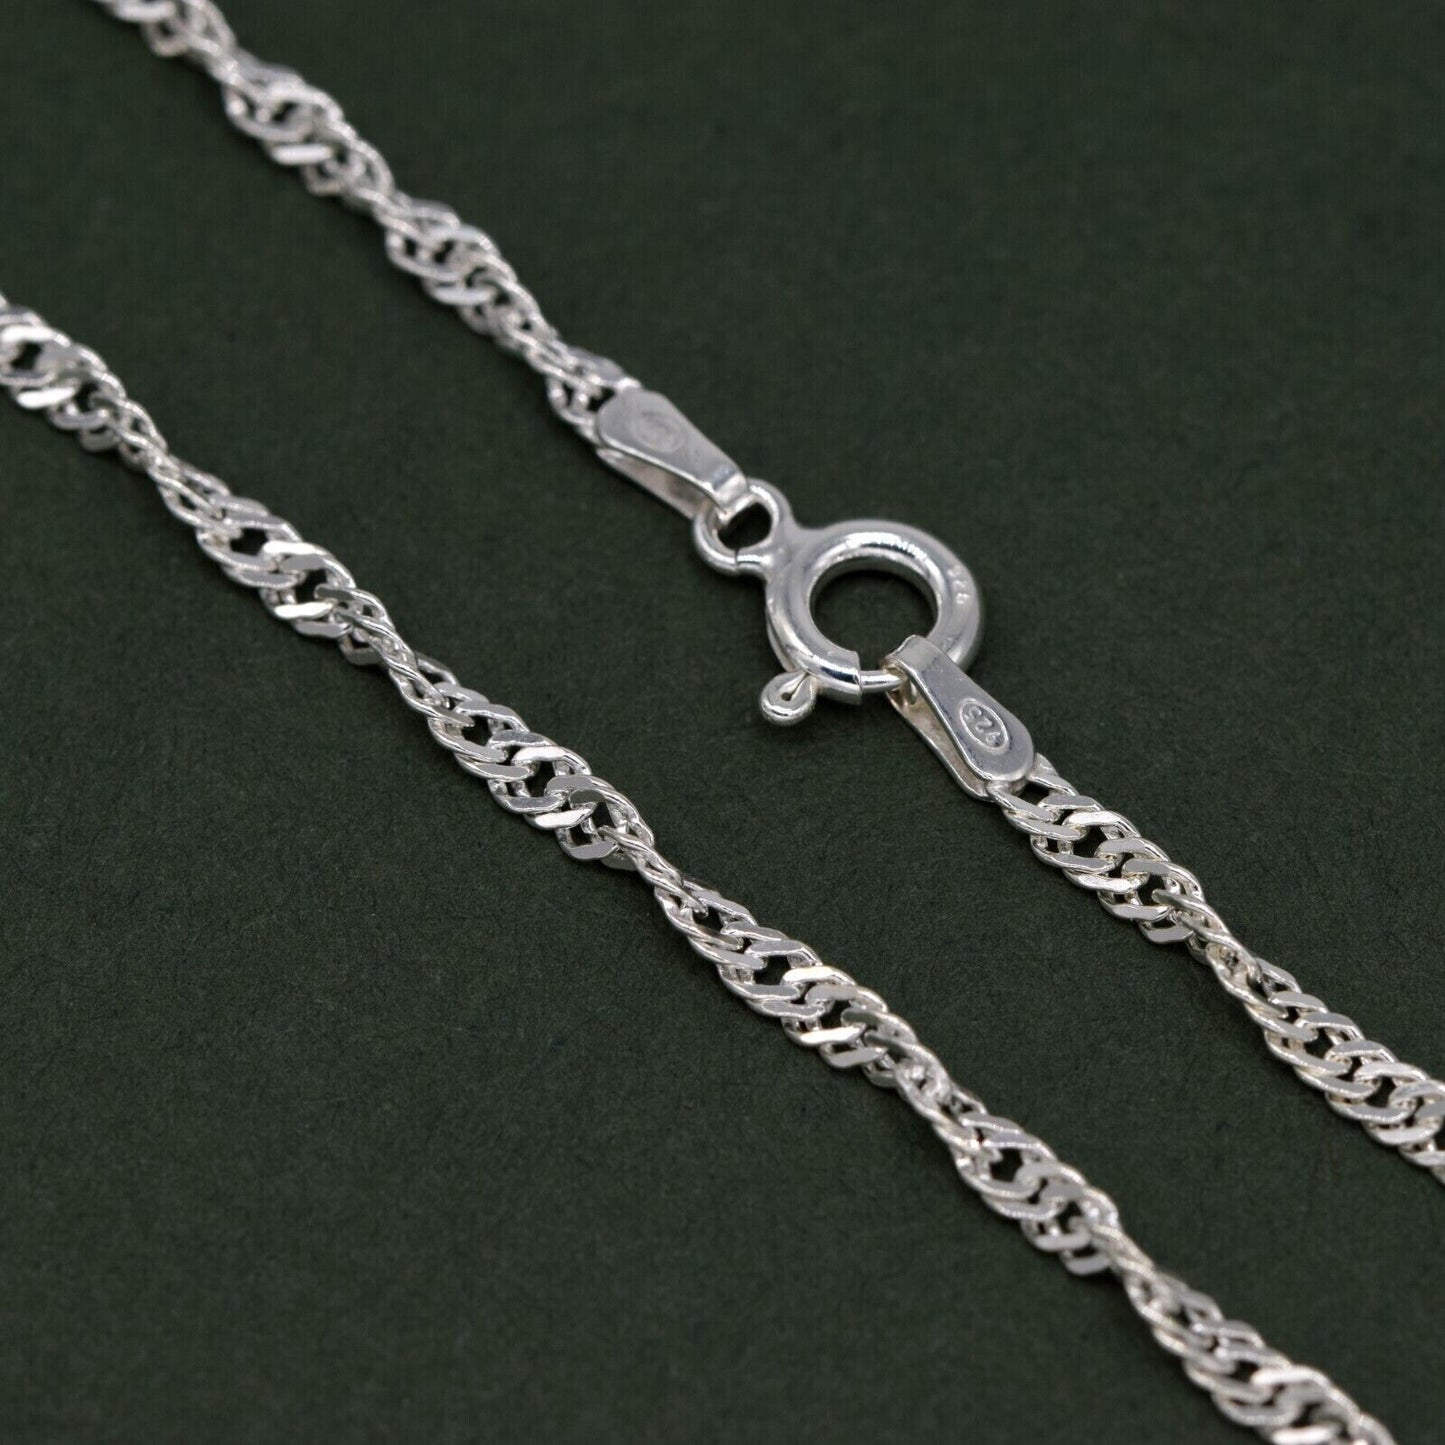 Genuine 925 Sterling Silver 10" Singapore Chain Anklet With Puffed Heart Pendant